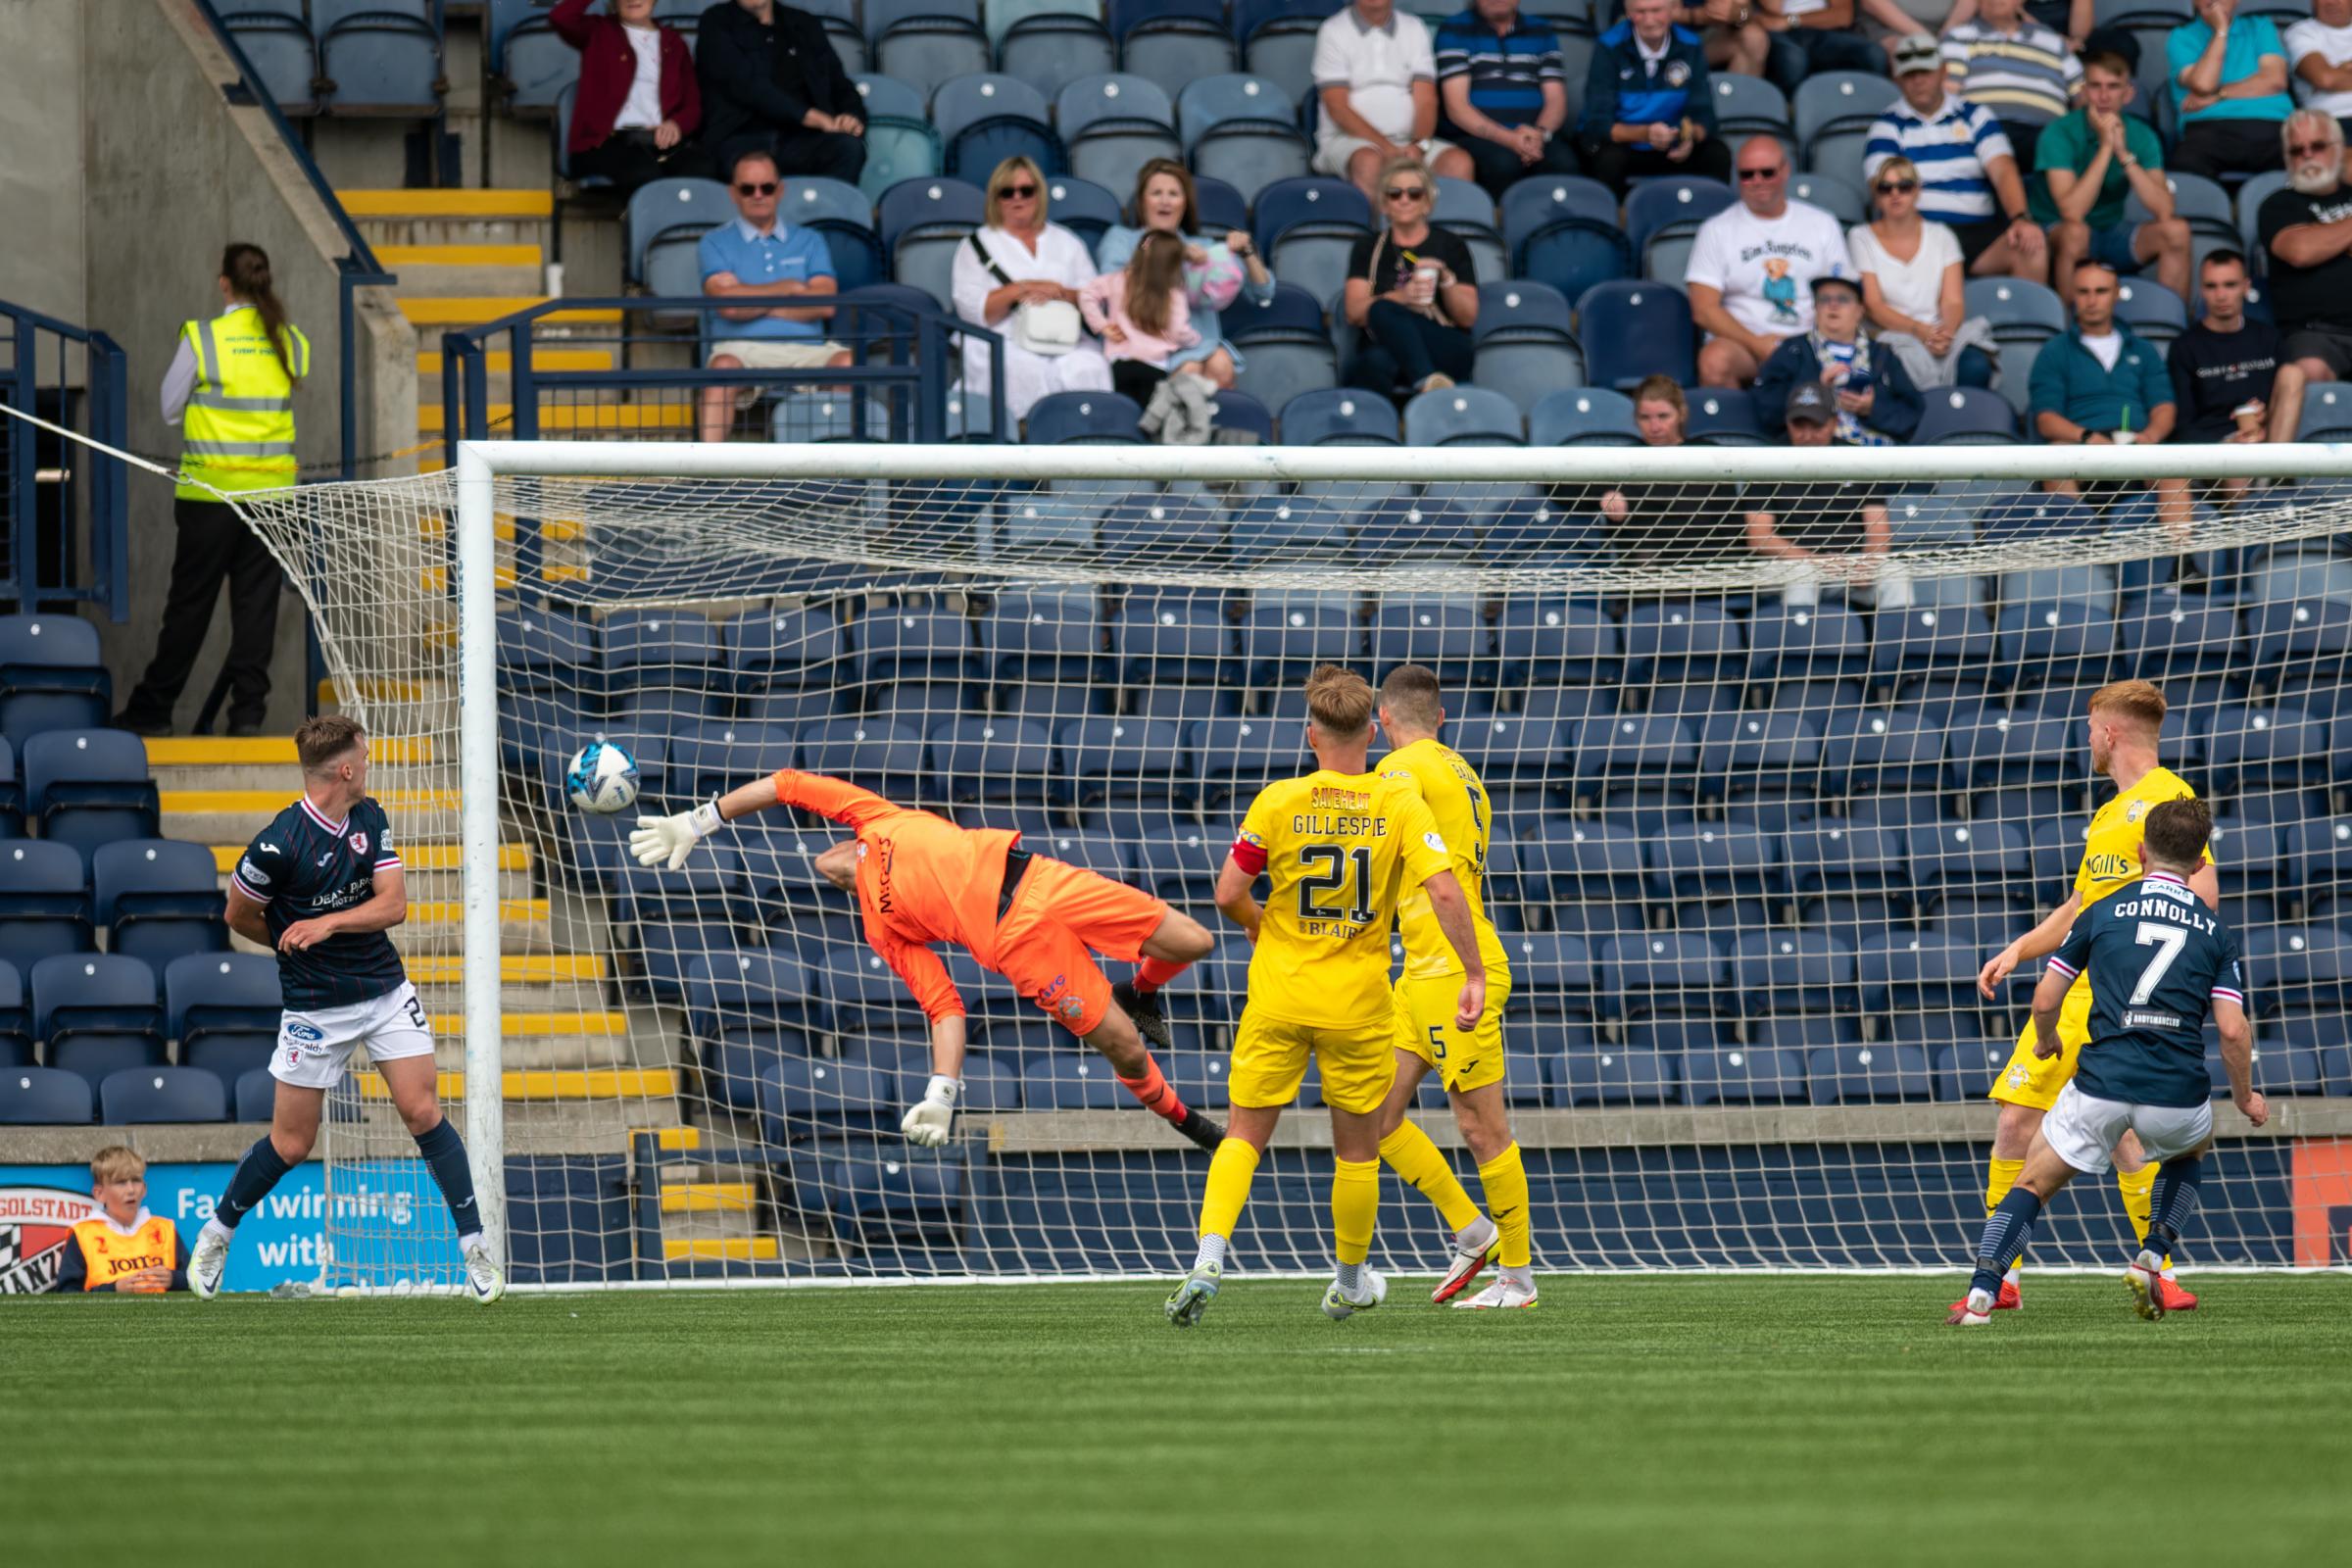 Morton boss Dougie Imrie tells players to cut out mistakes